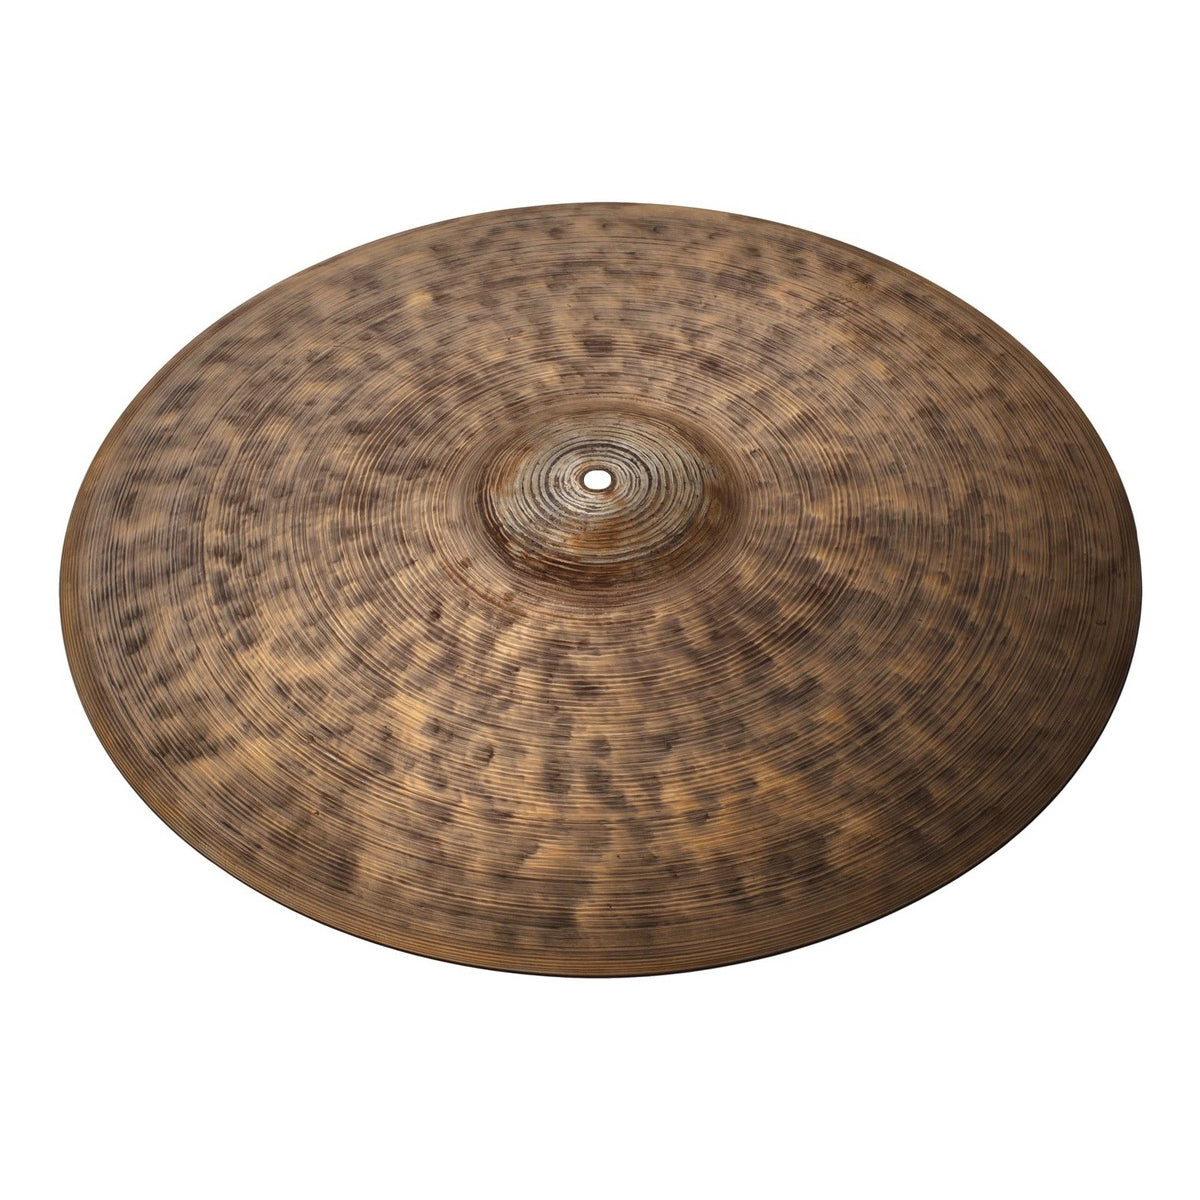 Istanbul Agop 30th Anniversary 26" Ride